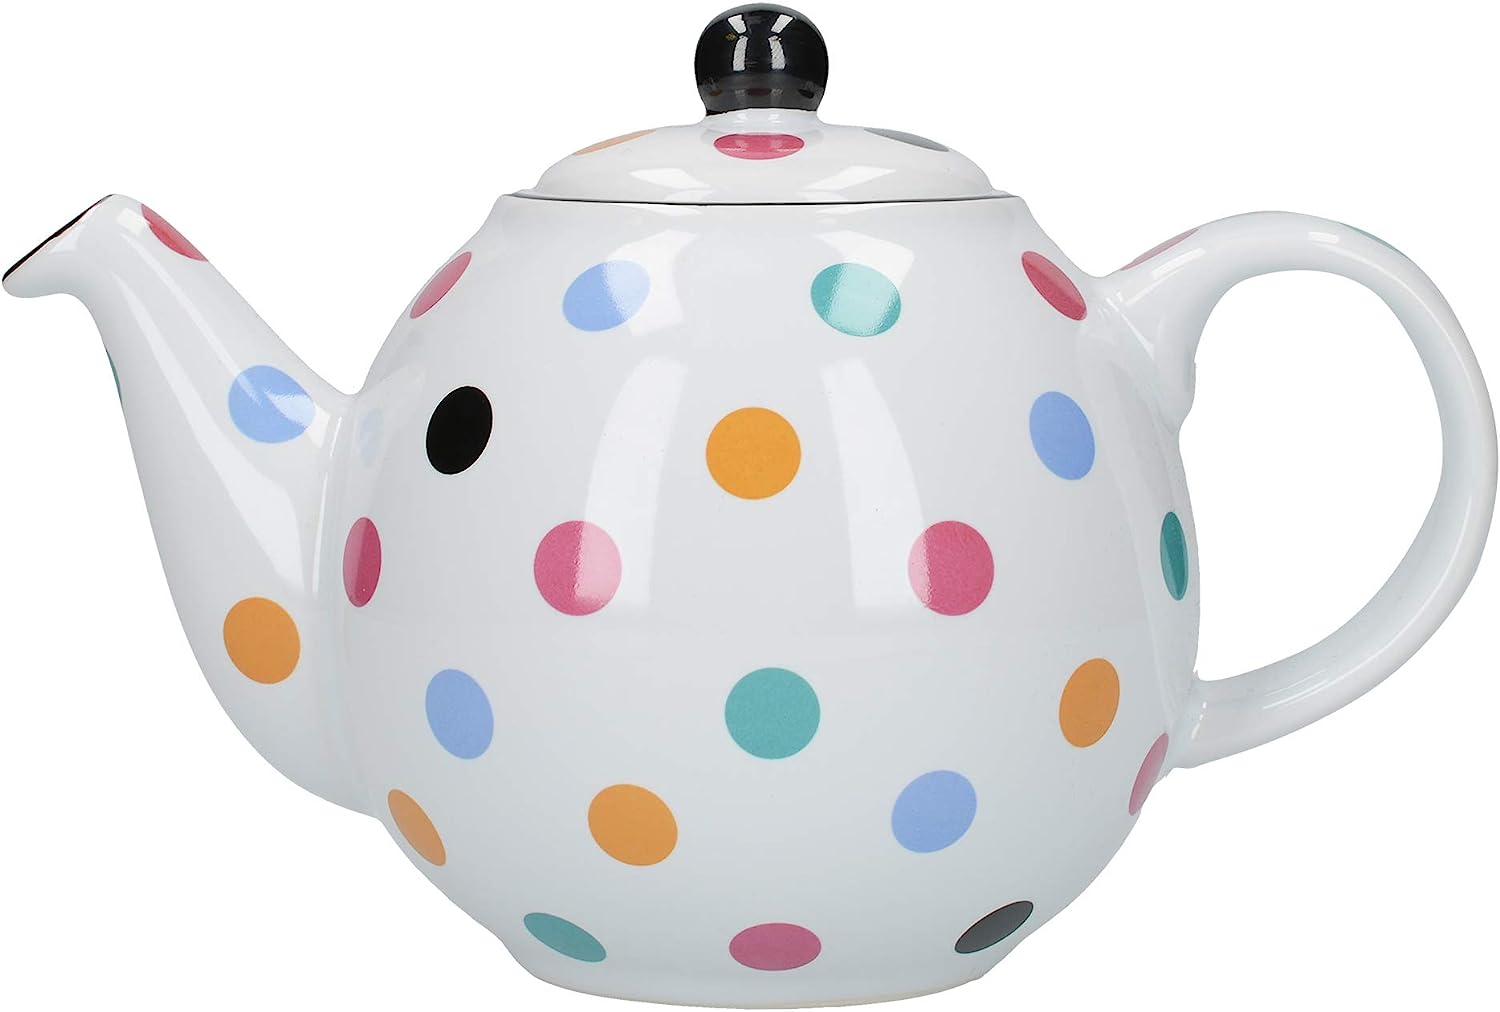 London Pottery Globe Polka Dot Teapot with Strainer, Ceramic, White/Multipoint, 6 Cups (1.2 Litre)